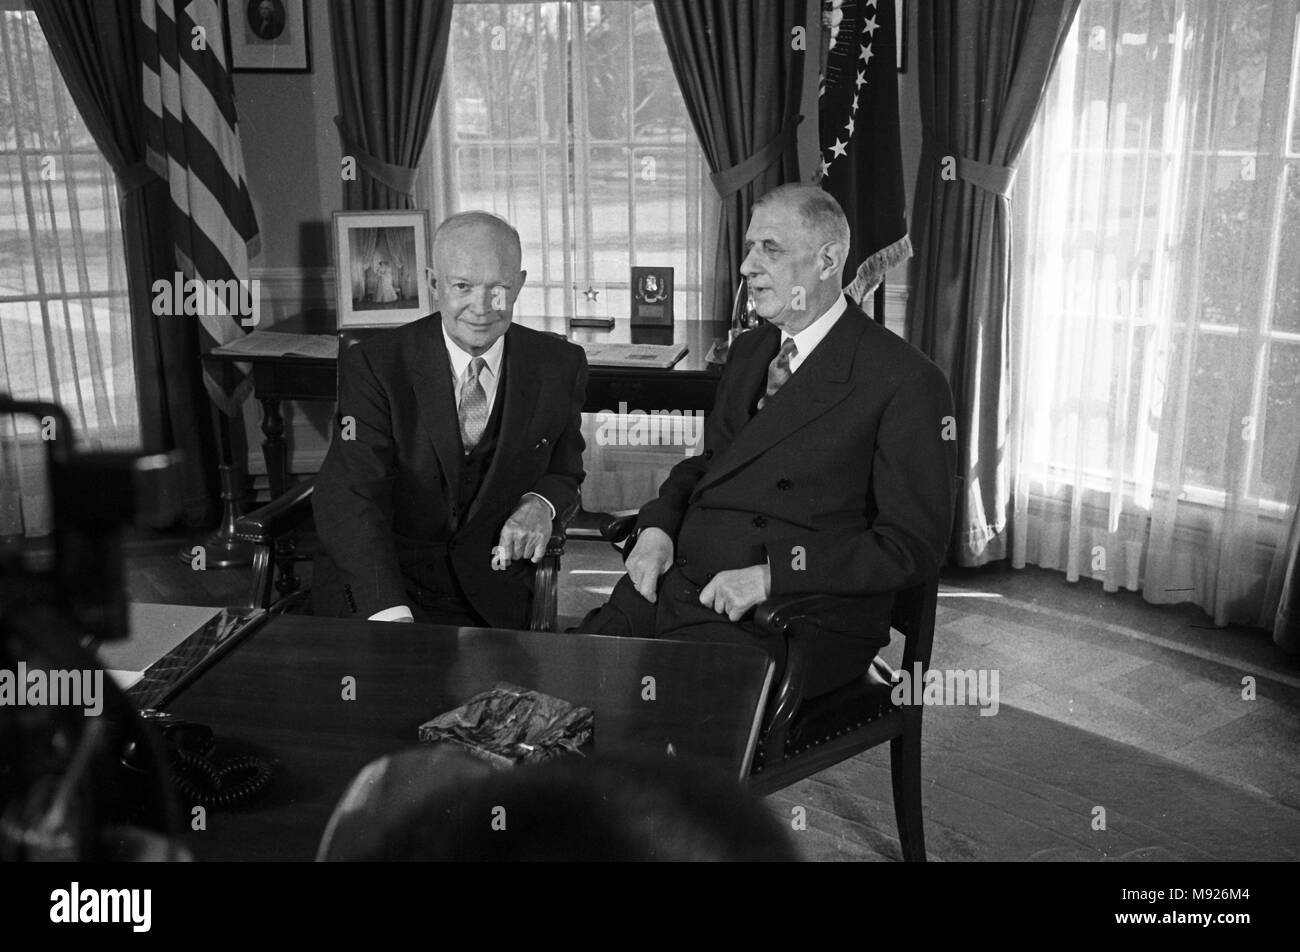 Washington, District of Columbia, USA. 25th Apr, 1960. United States President Dwight D. Eisenhower, left, meets President Charles de Gaulle of France in the Oval Office of the White House in Washington, DC on April 25, 1960.Credit: Benjamin E. ''Gene'' Forte/CNP Credit: Benjamin E. ''Gene'' Forte/CNP/ZUMA Wire/Alamy Live News Stock Photo